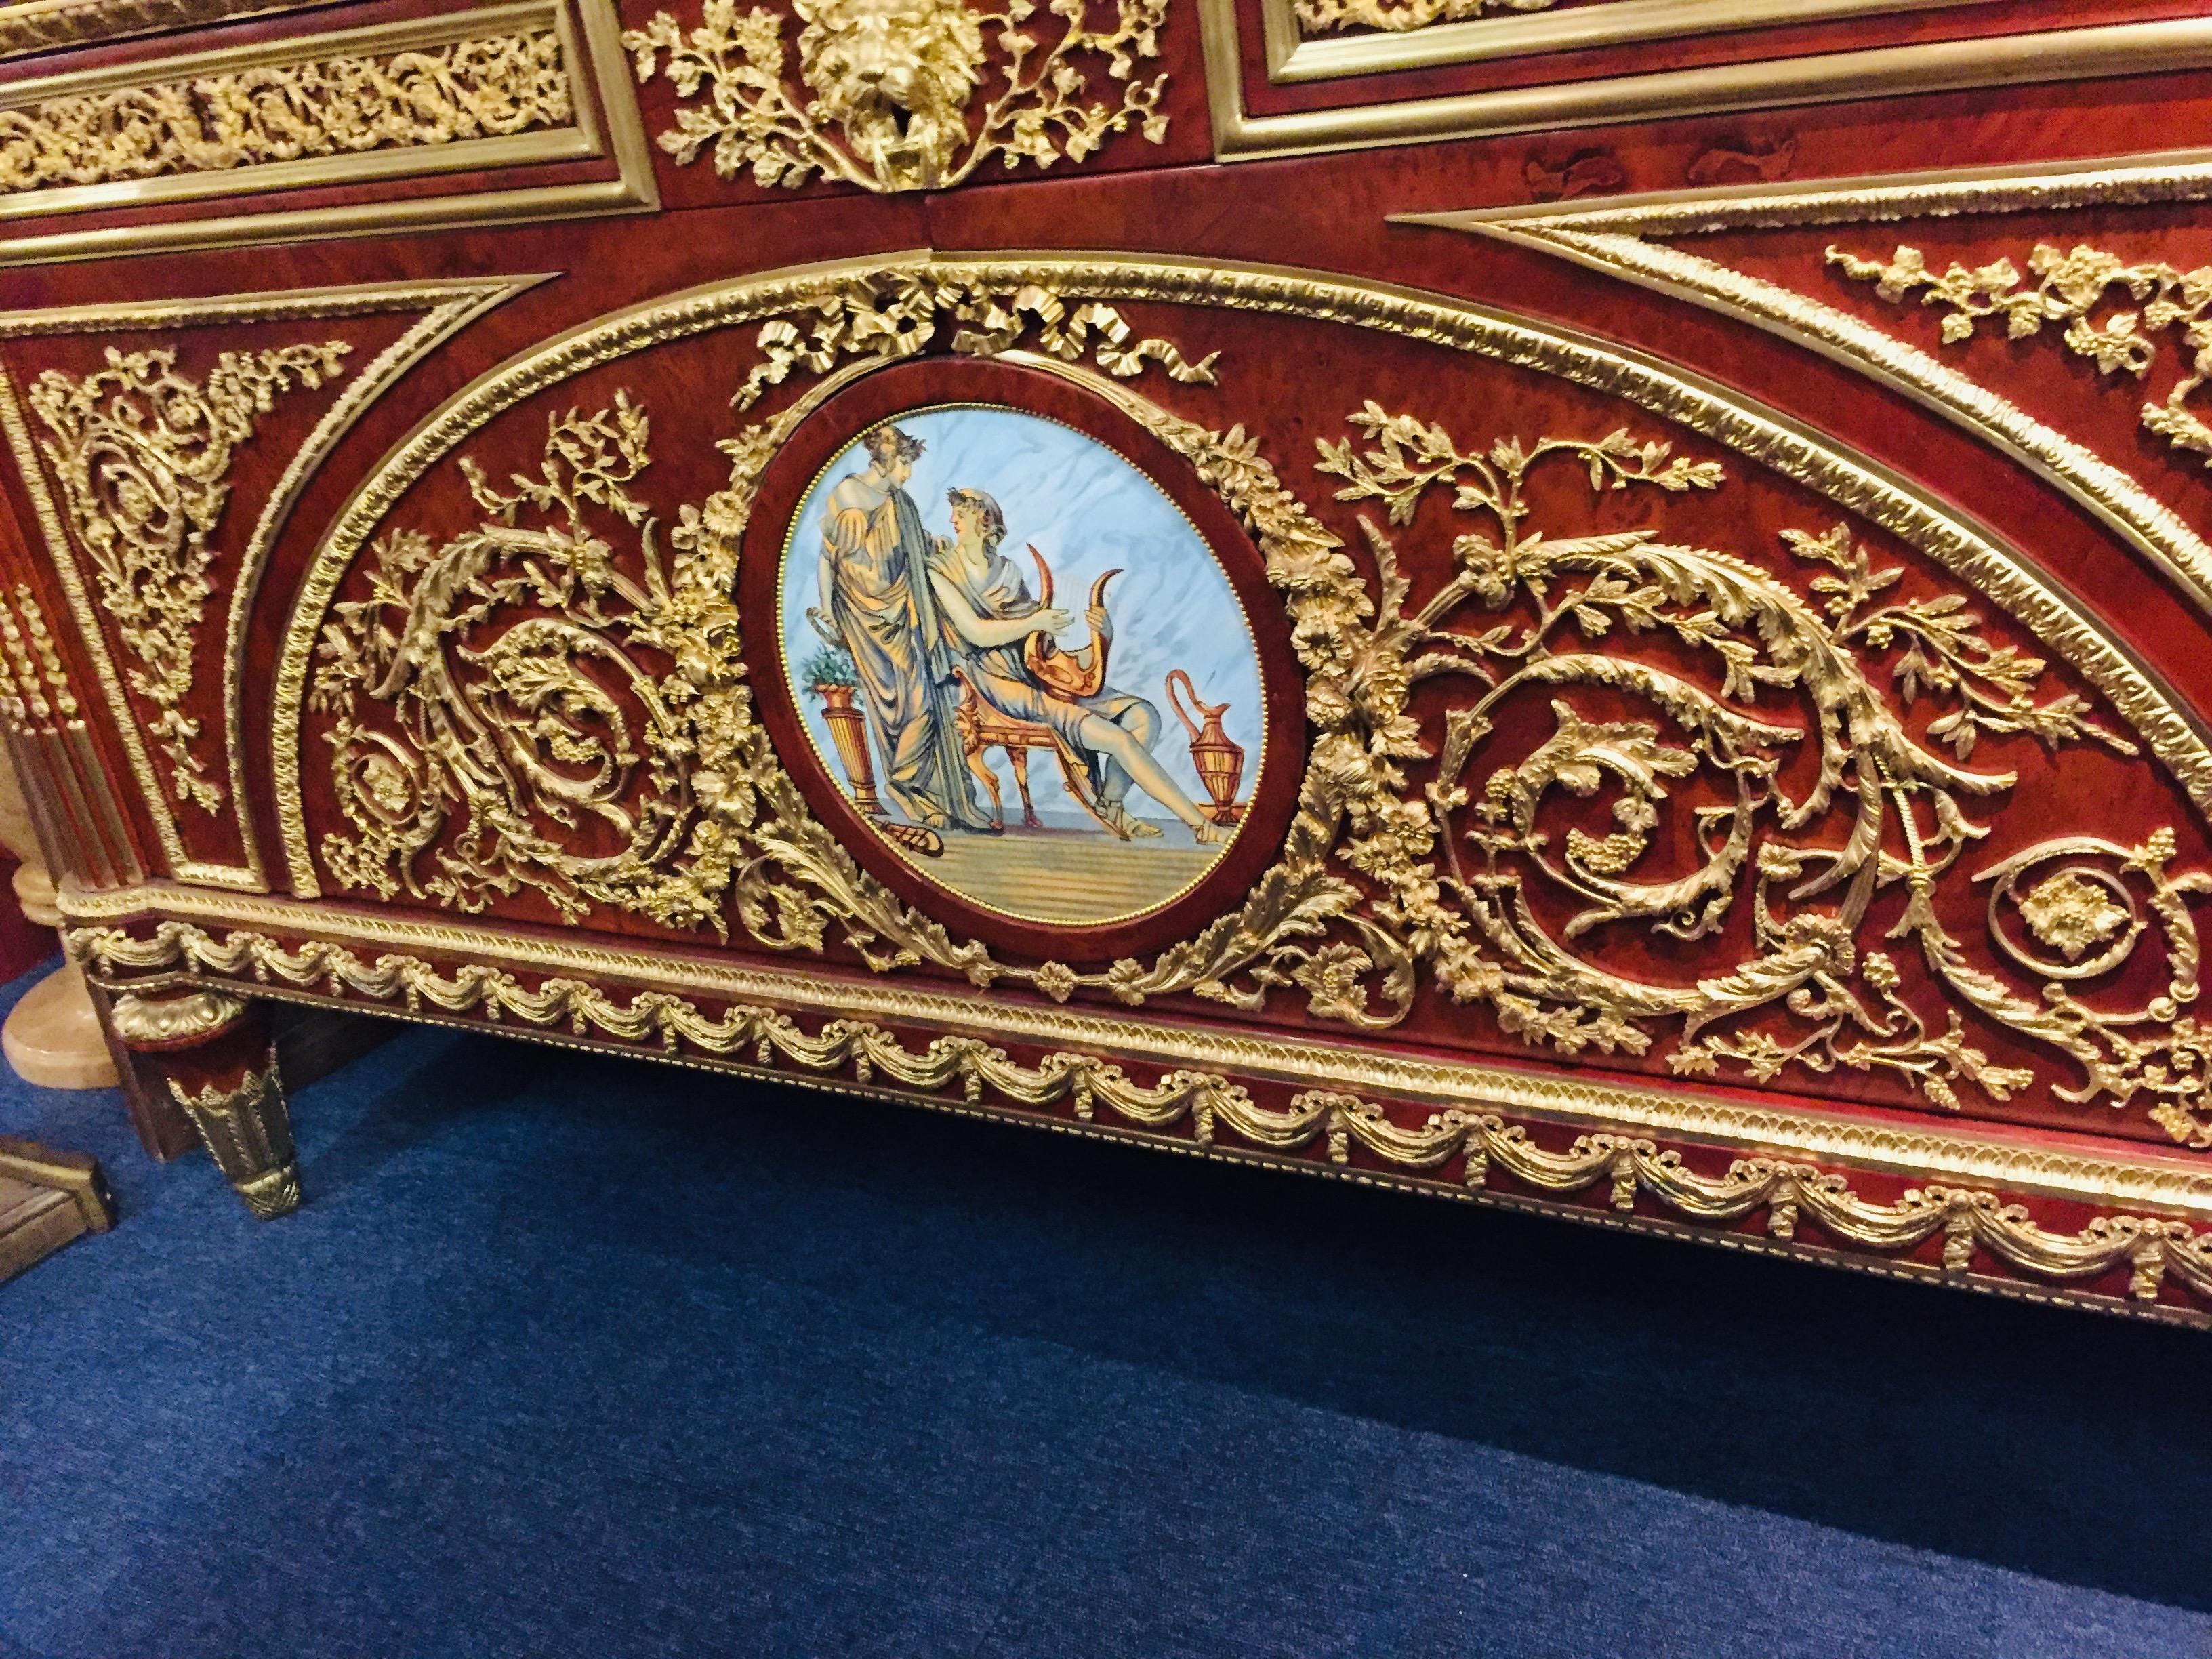 20th Century Significant Commode in the Style of Louis XV  and Marie Antoinette